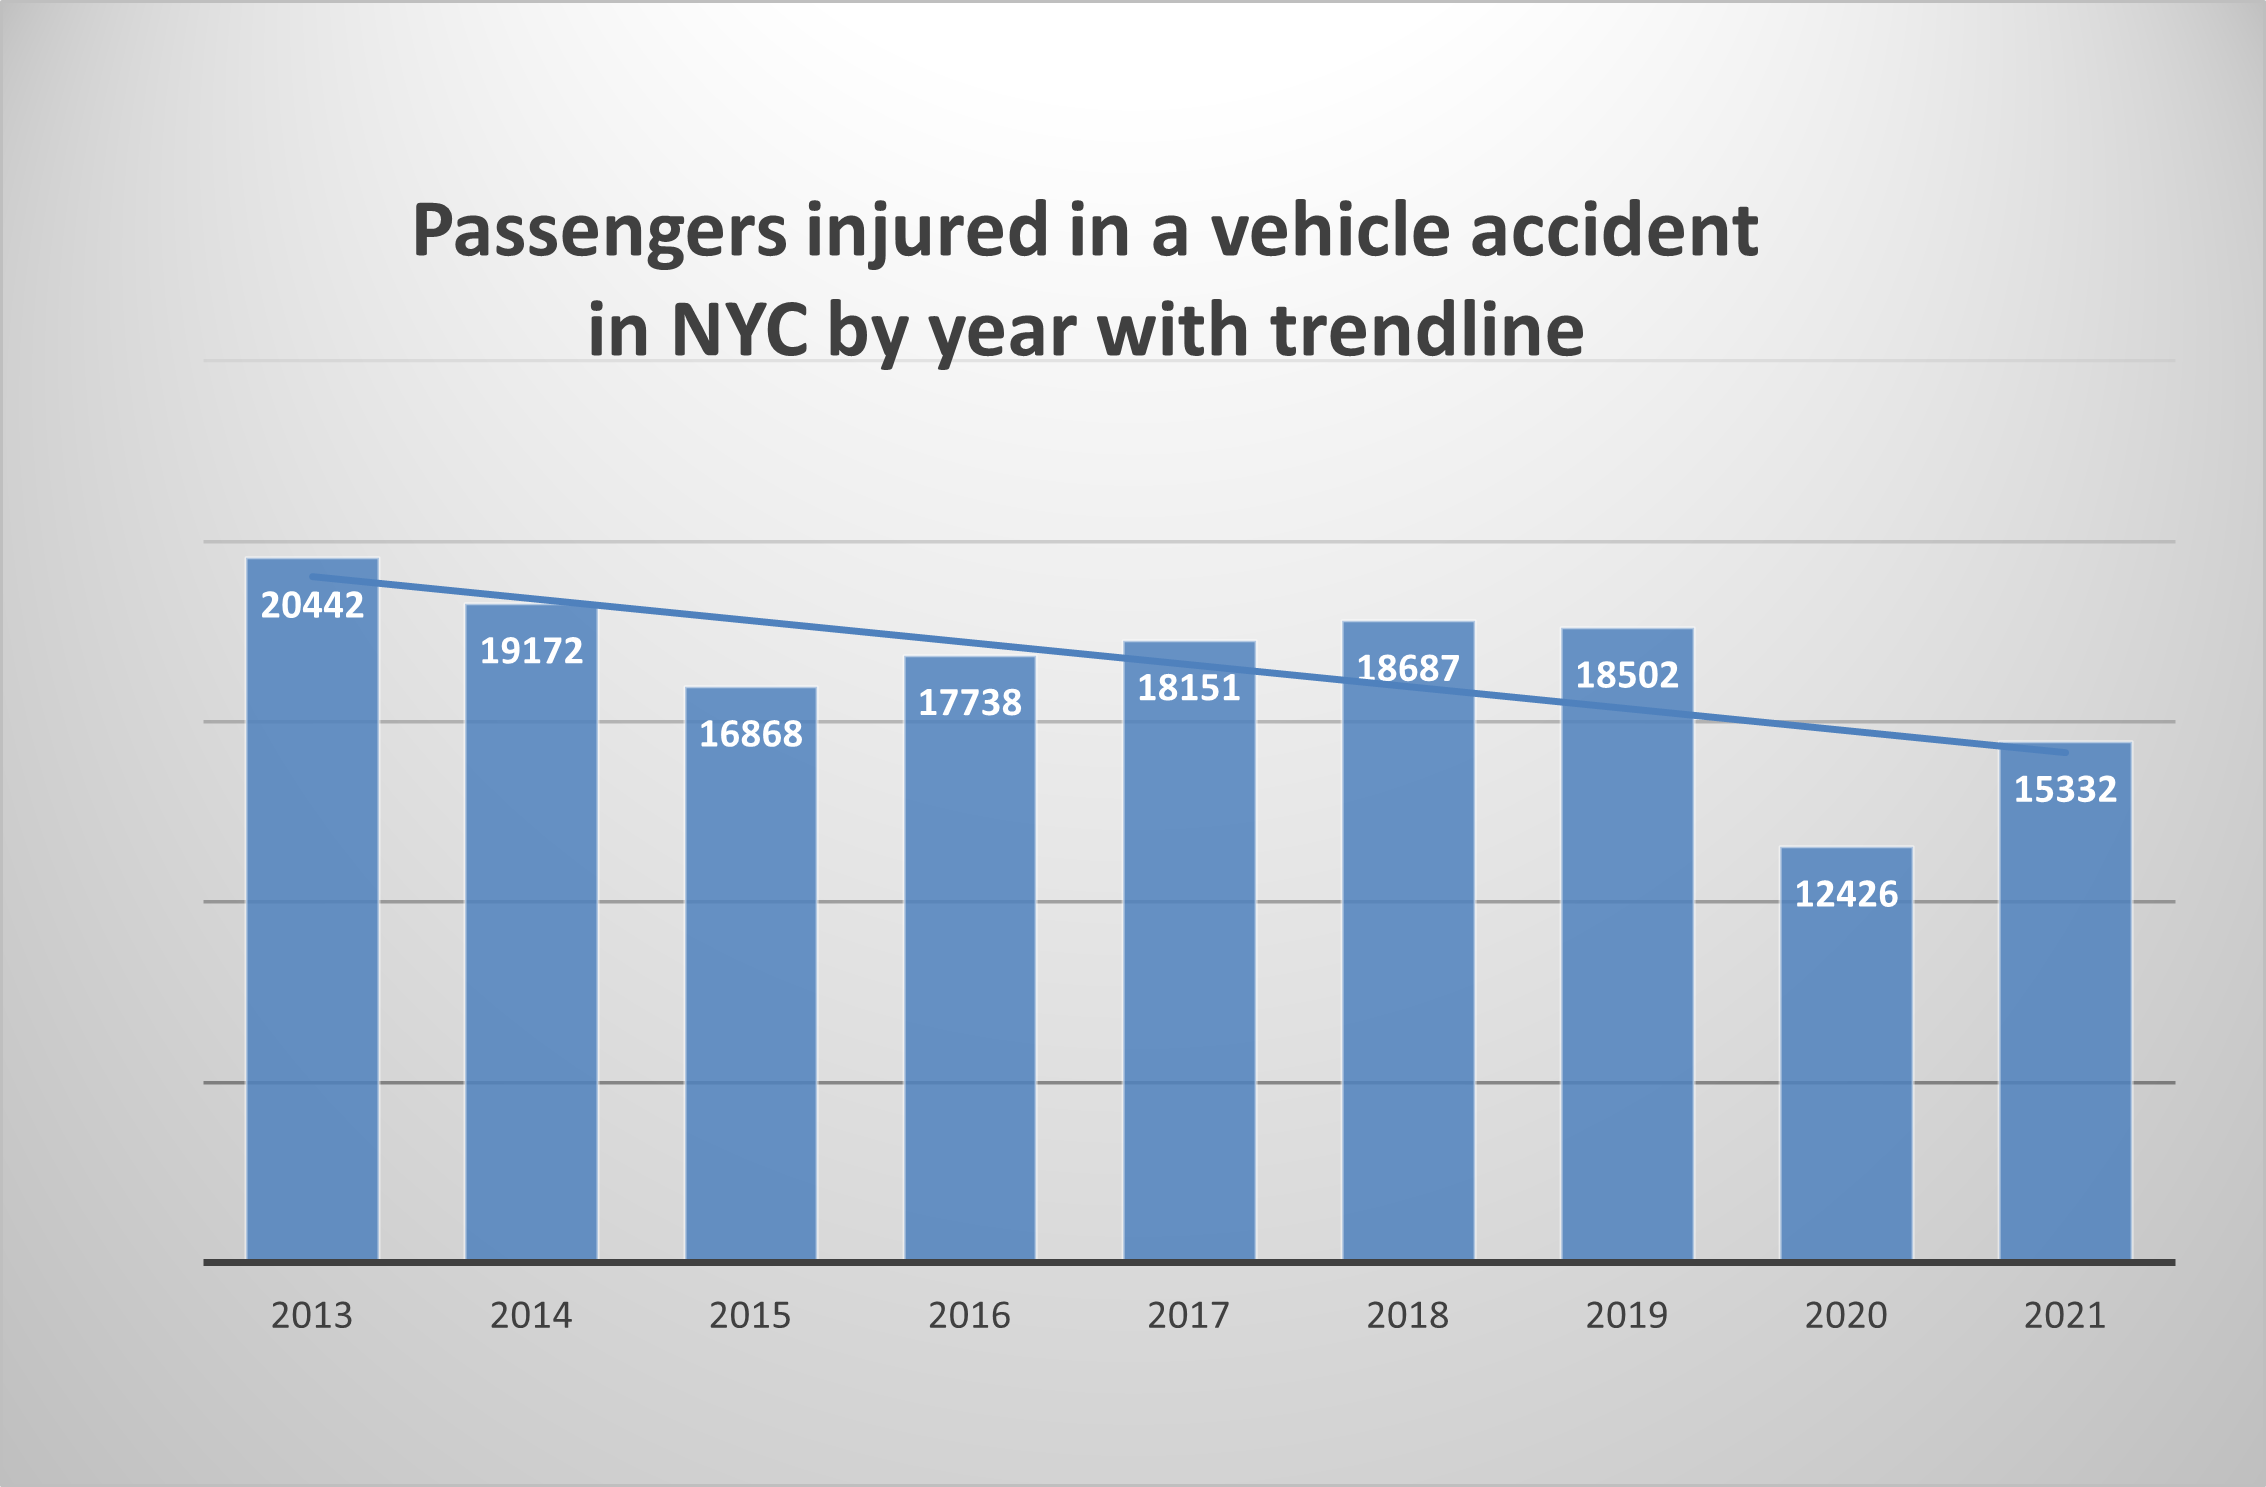 passengers injured in car accidents 2021 NYC